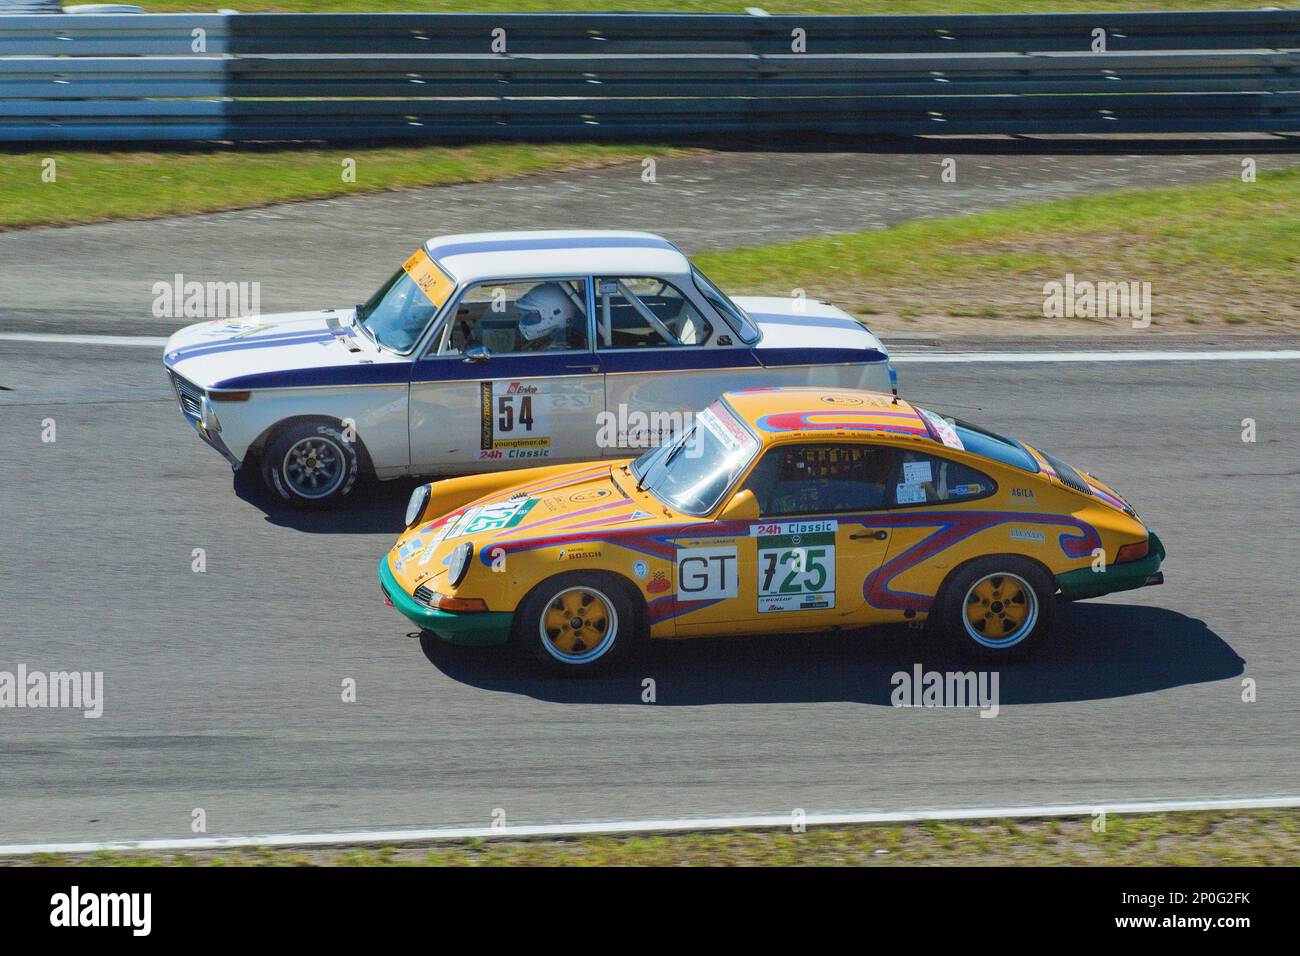 Porsche 911, BMW 2002i, Nuerburgring race track, 24h Classic, curves, curbes, tracks, race track, track, youngtimer trophy, classic car, 70ies Stock Photo